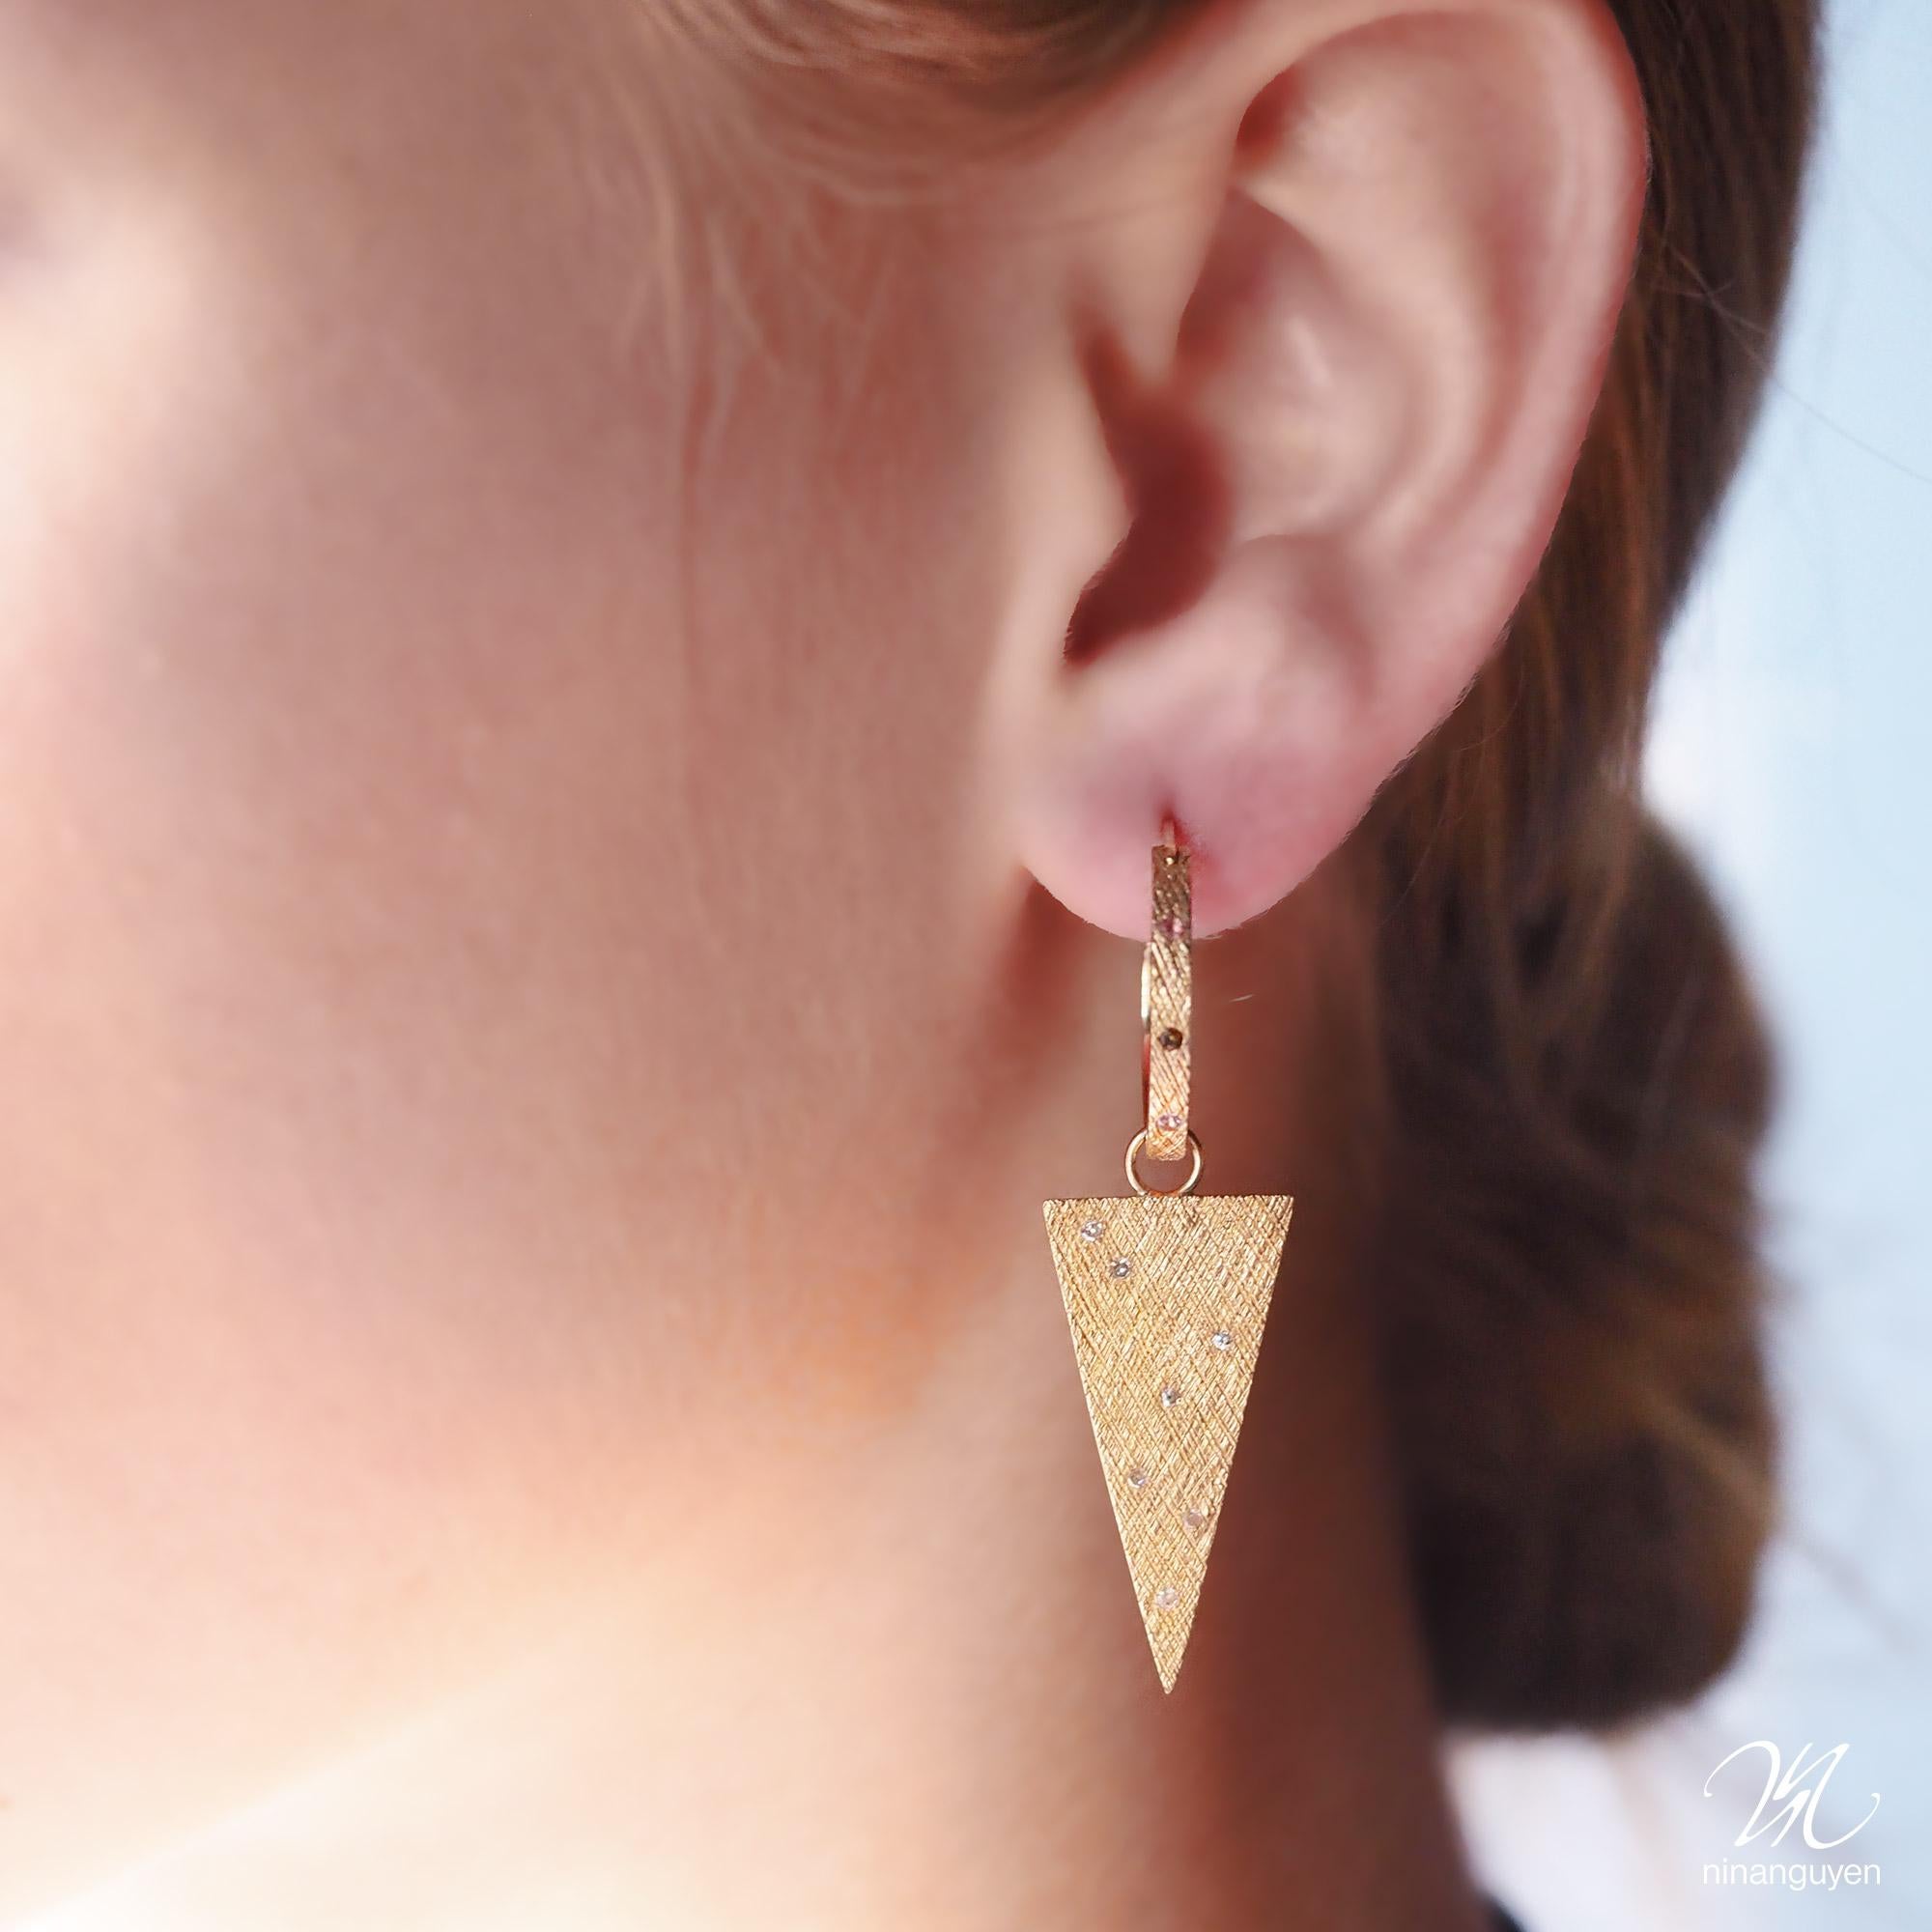 Defined by a hand-hammered crosshatch pattern, sparkling diamonds, and a cool, spiky shape, the Florentine Triangle 15x30mm Gold Jackets add gorgeous shimmer and texture—and a little edge—to your look. And when you mix and match with our other